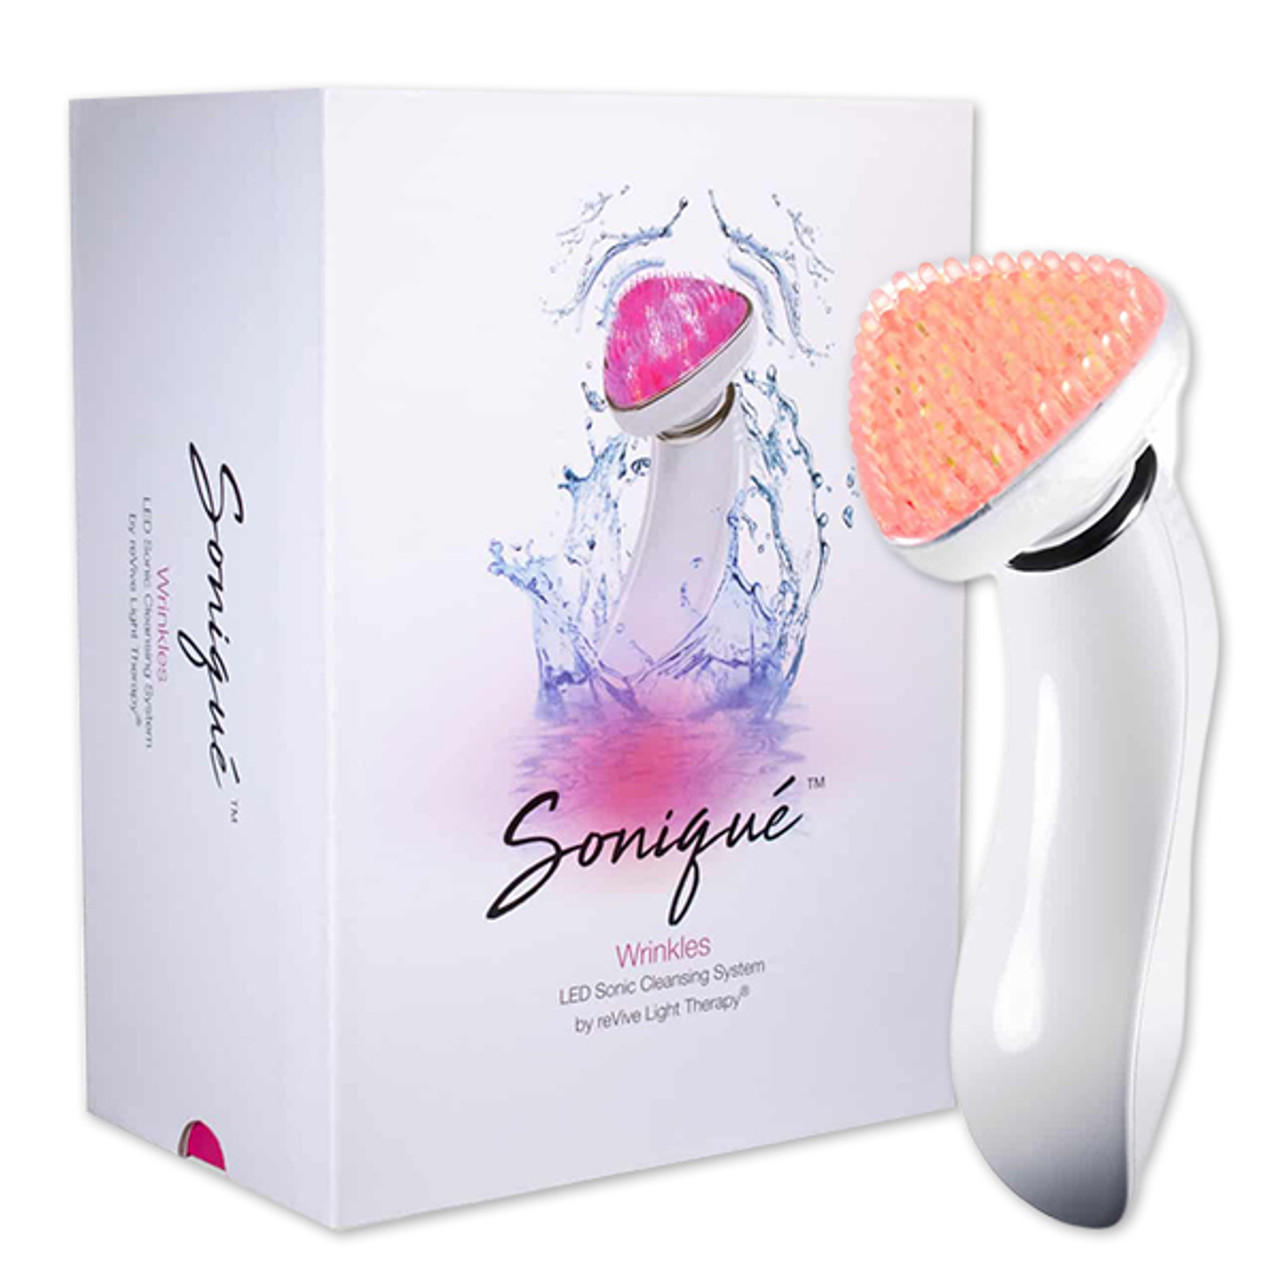 Sonique Anti-Aging LED Sonic Cleansing System